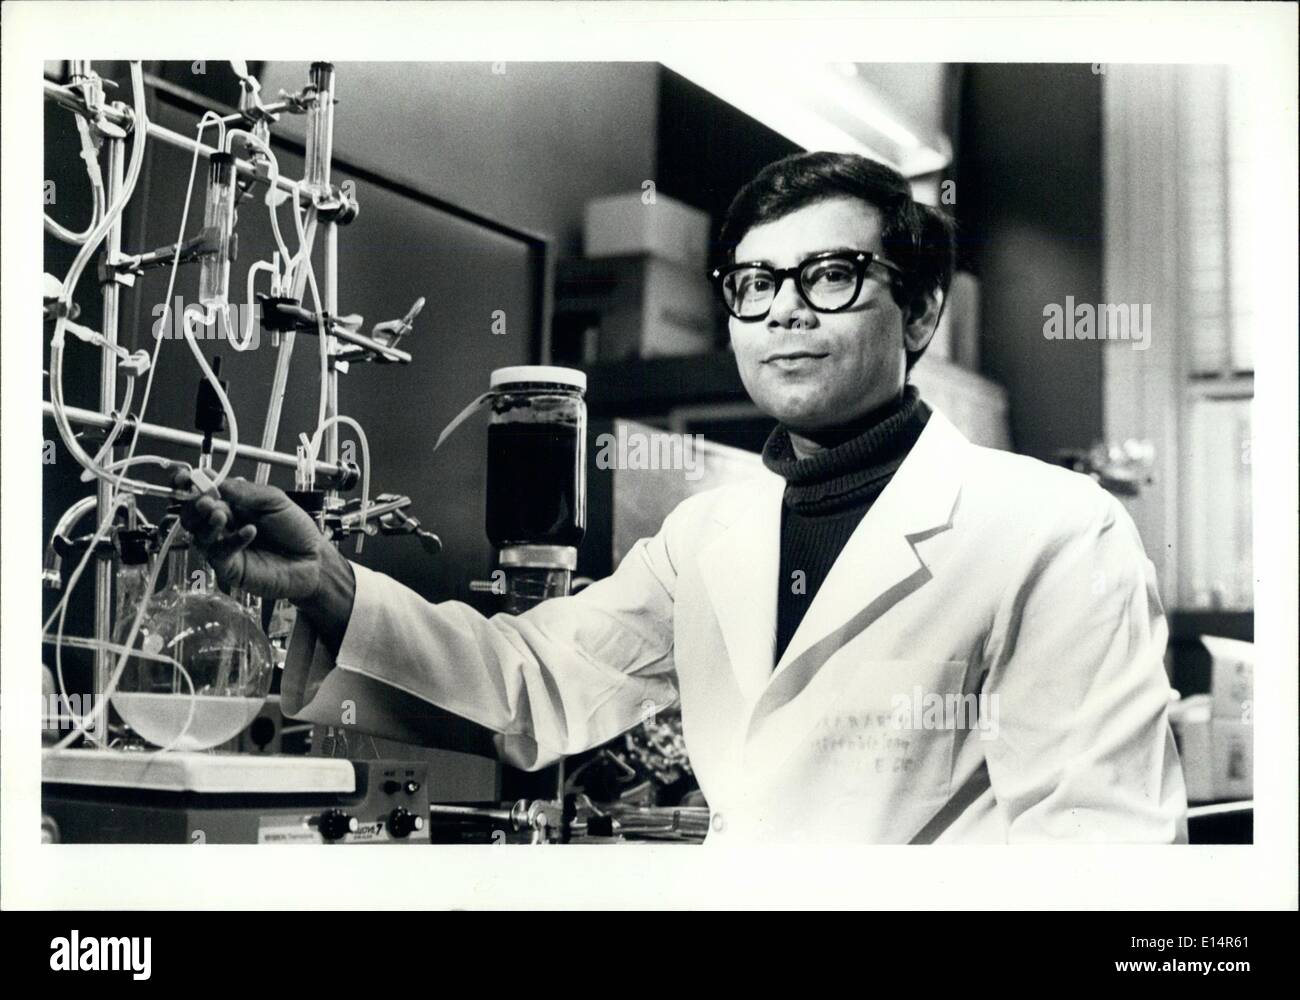 Apr. 18, 2012 - At work in his laboratory is A.M. Chakrabarty, Ph.D., professor of microbiology, College of Medicine, University of Illinois at the Medical Center, Chicago, Illinois. Stock Photo